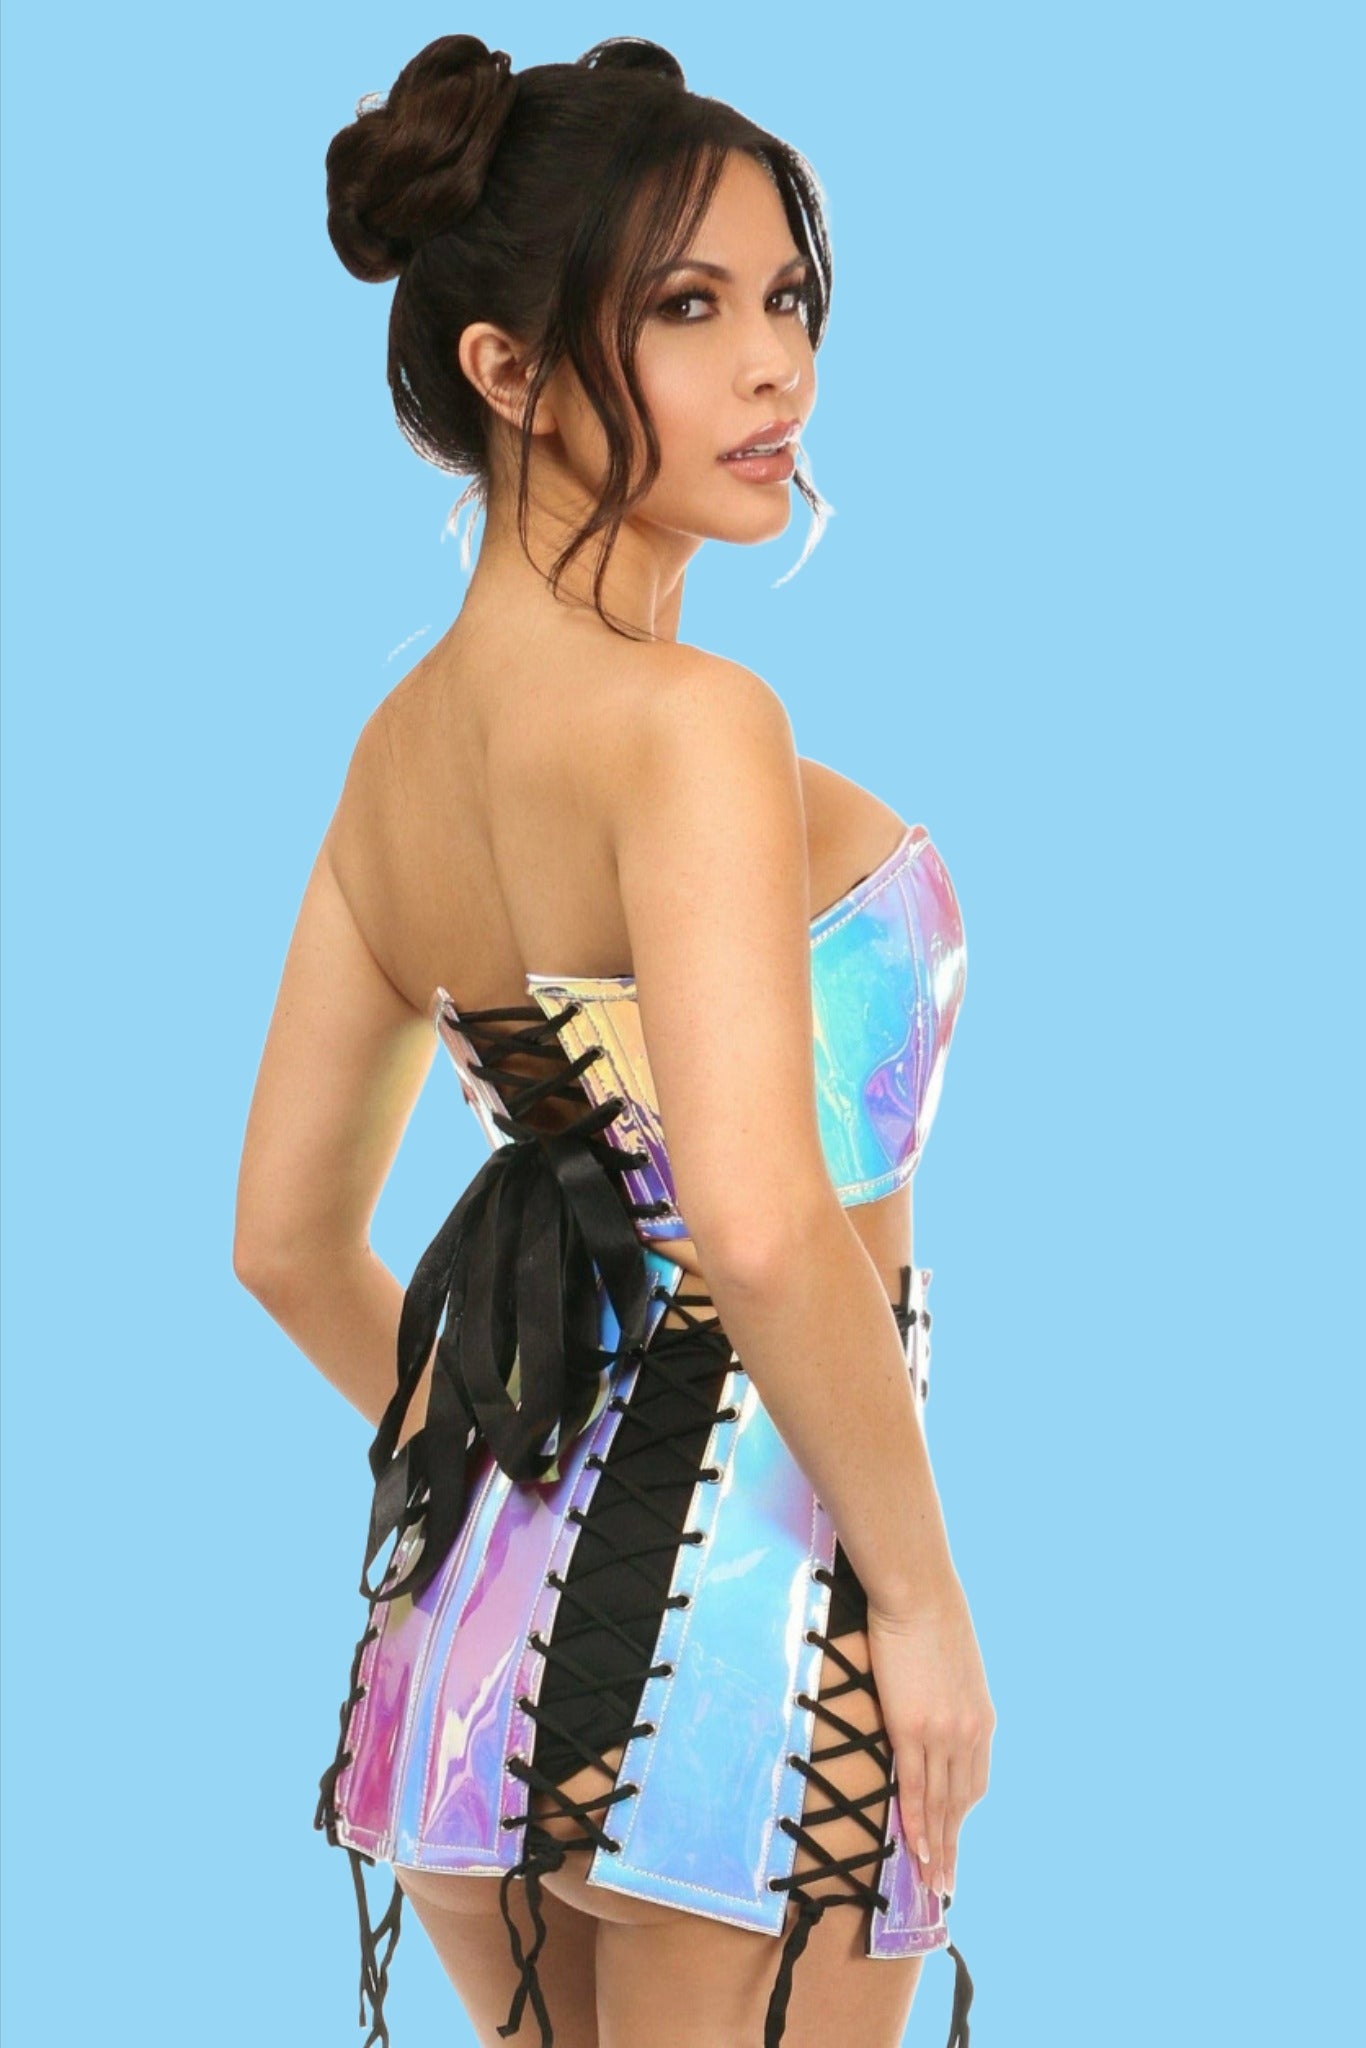 Lavish Hologram Skirt Set by Daisy Corsets in 6 Color Choices in Size S, M, L, XL, 2X, 3X, 4X, 5X, or 6X